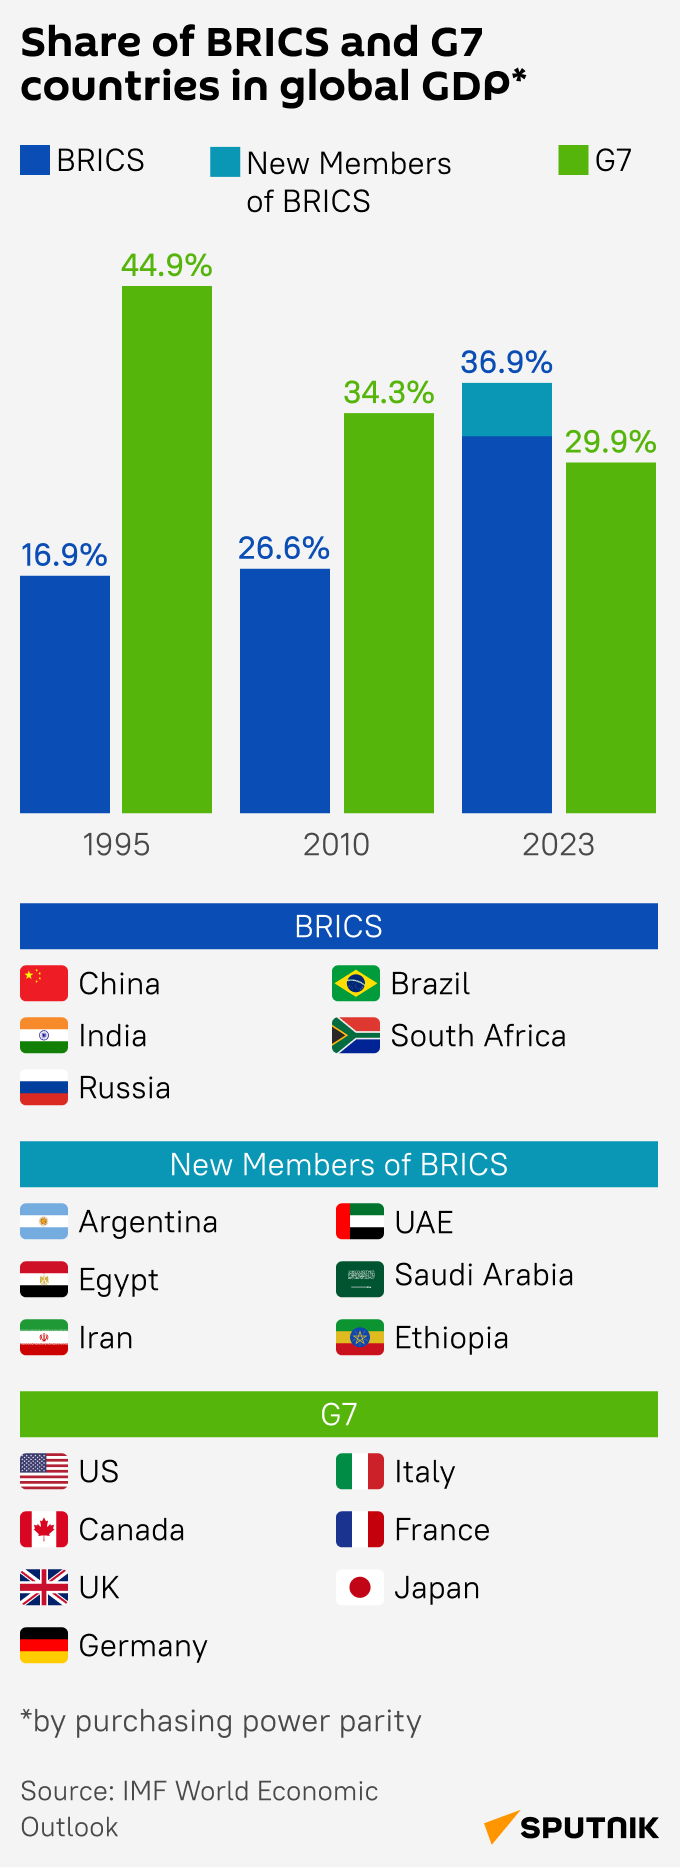 Share of BRICS and G7 Countries in Global GDP - Sputnik International